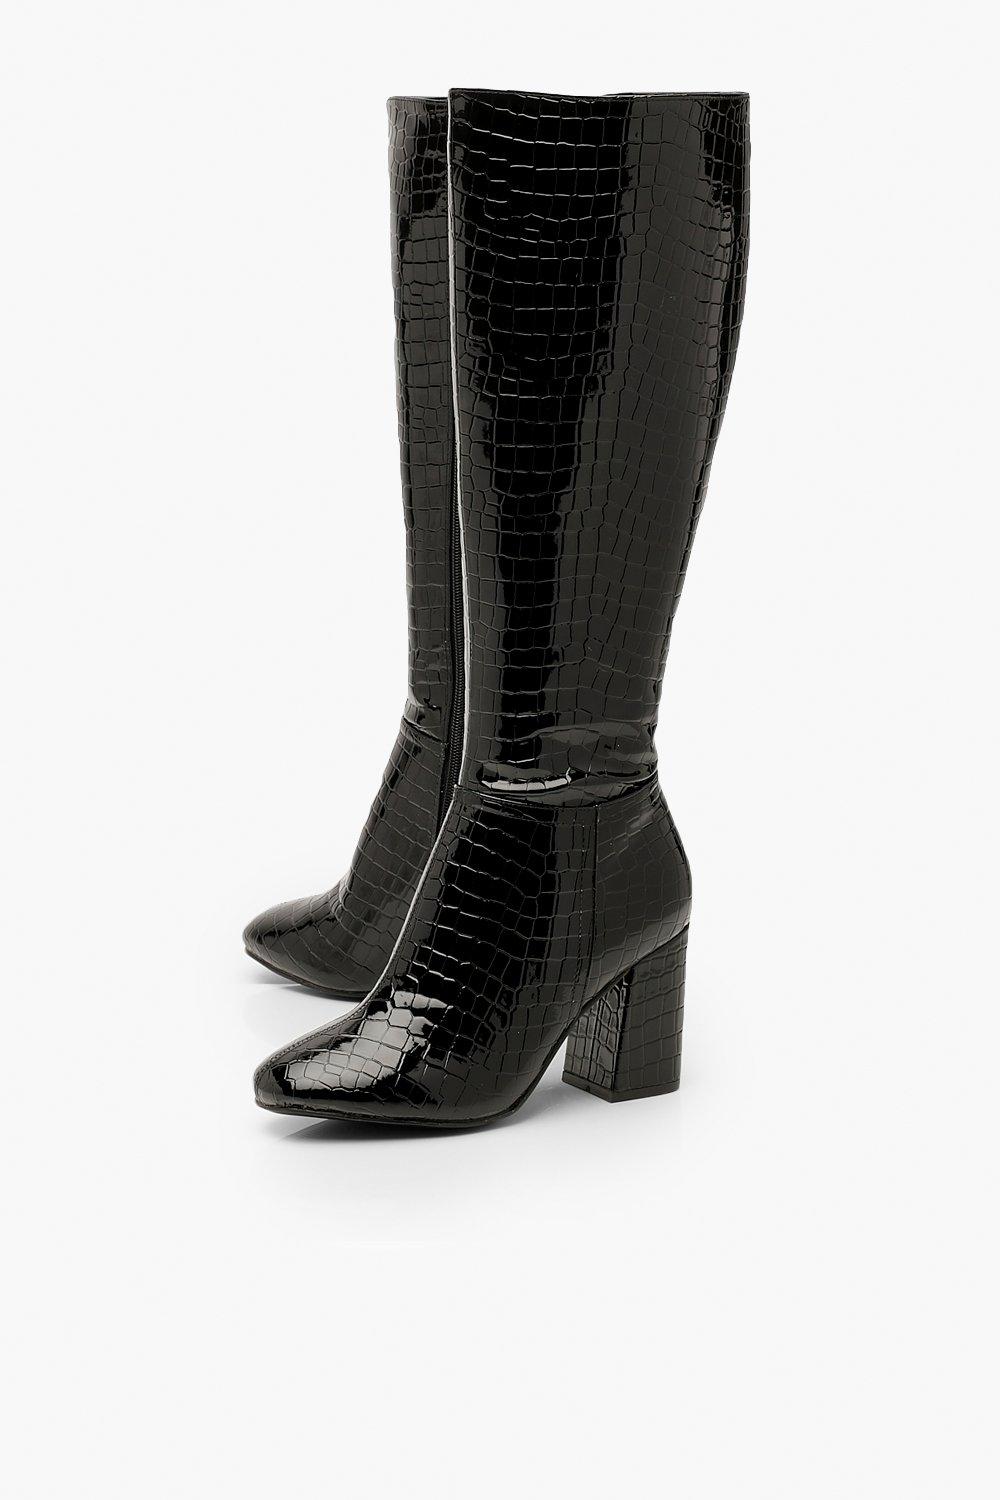 black fitted knee high boots